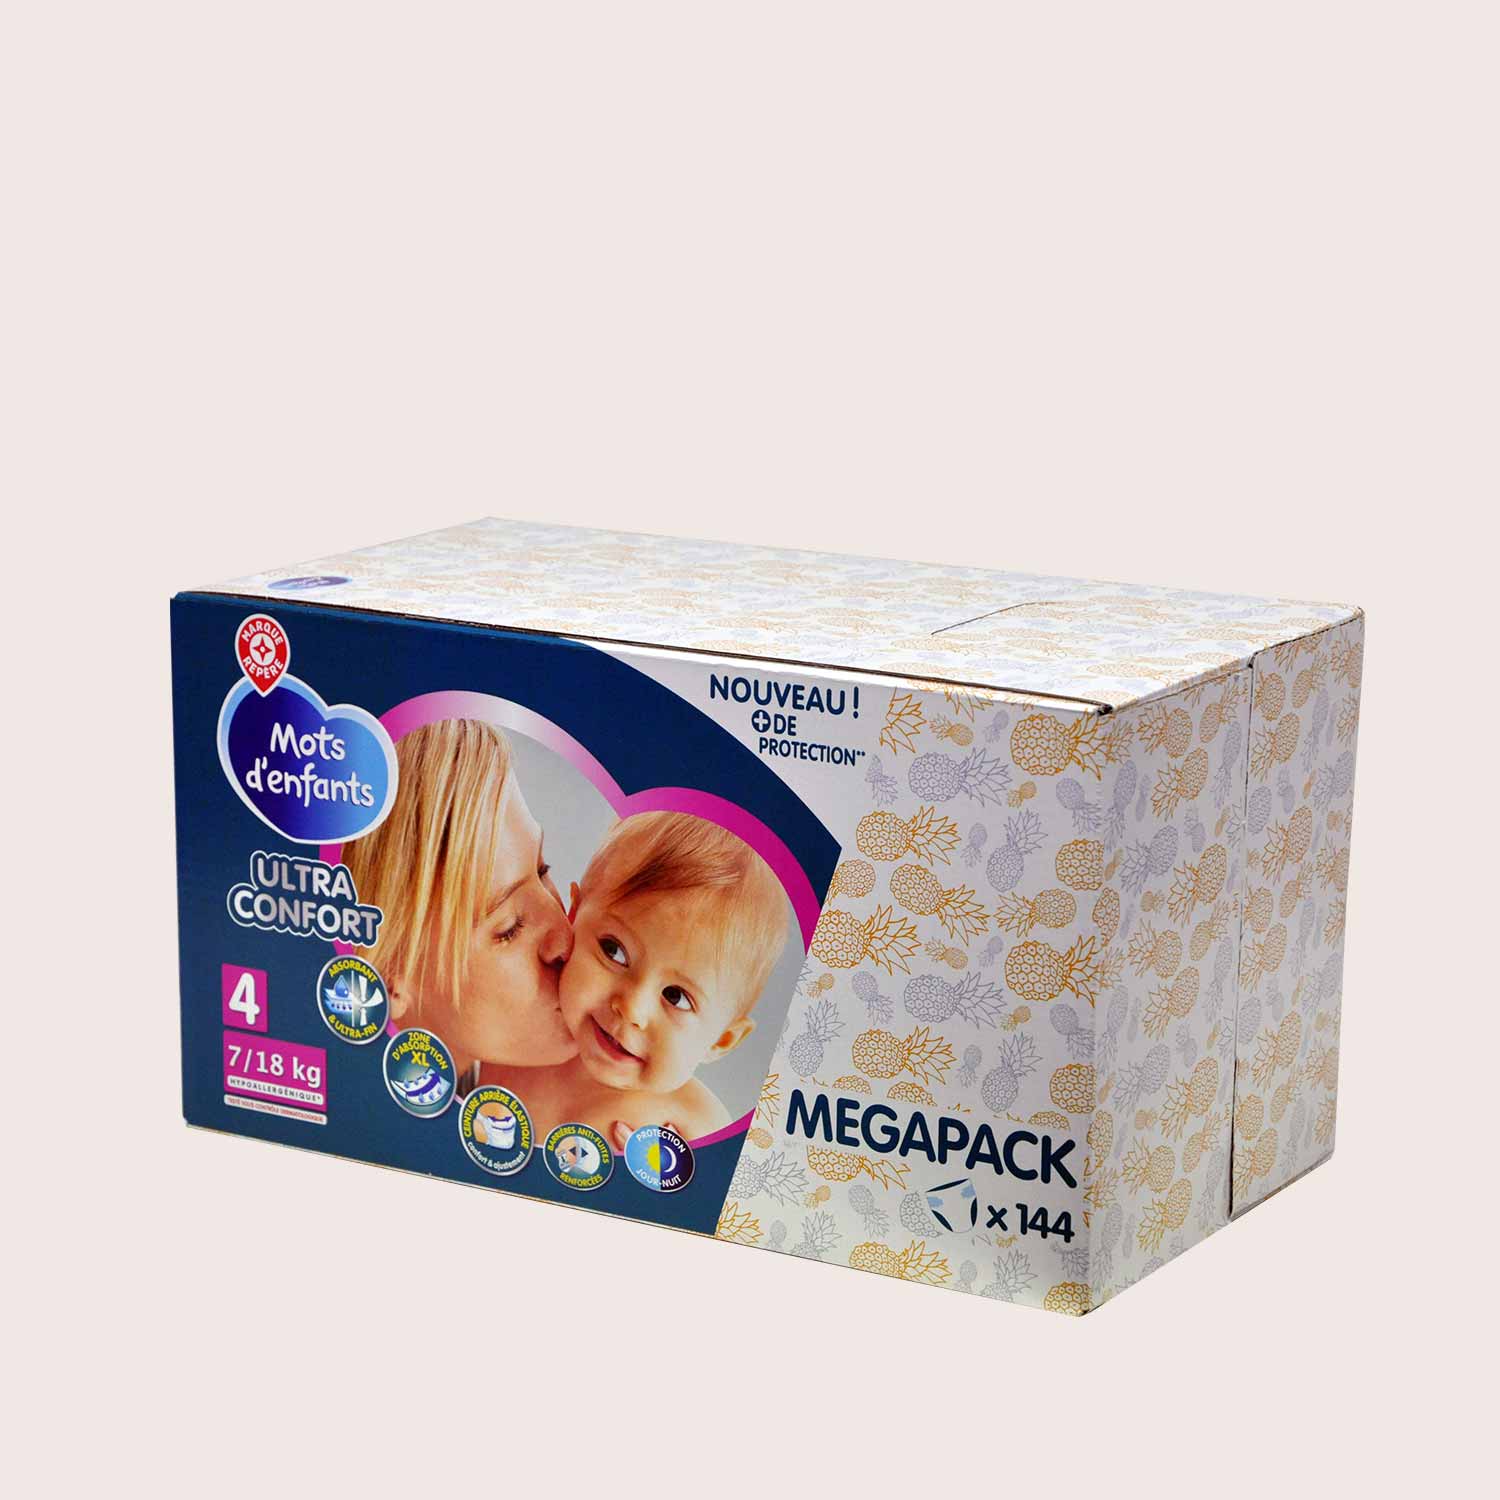 Packaging for nappies